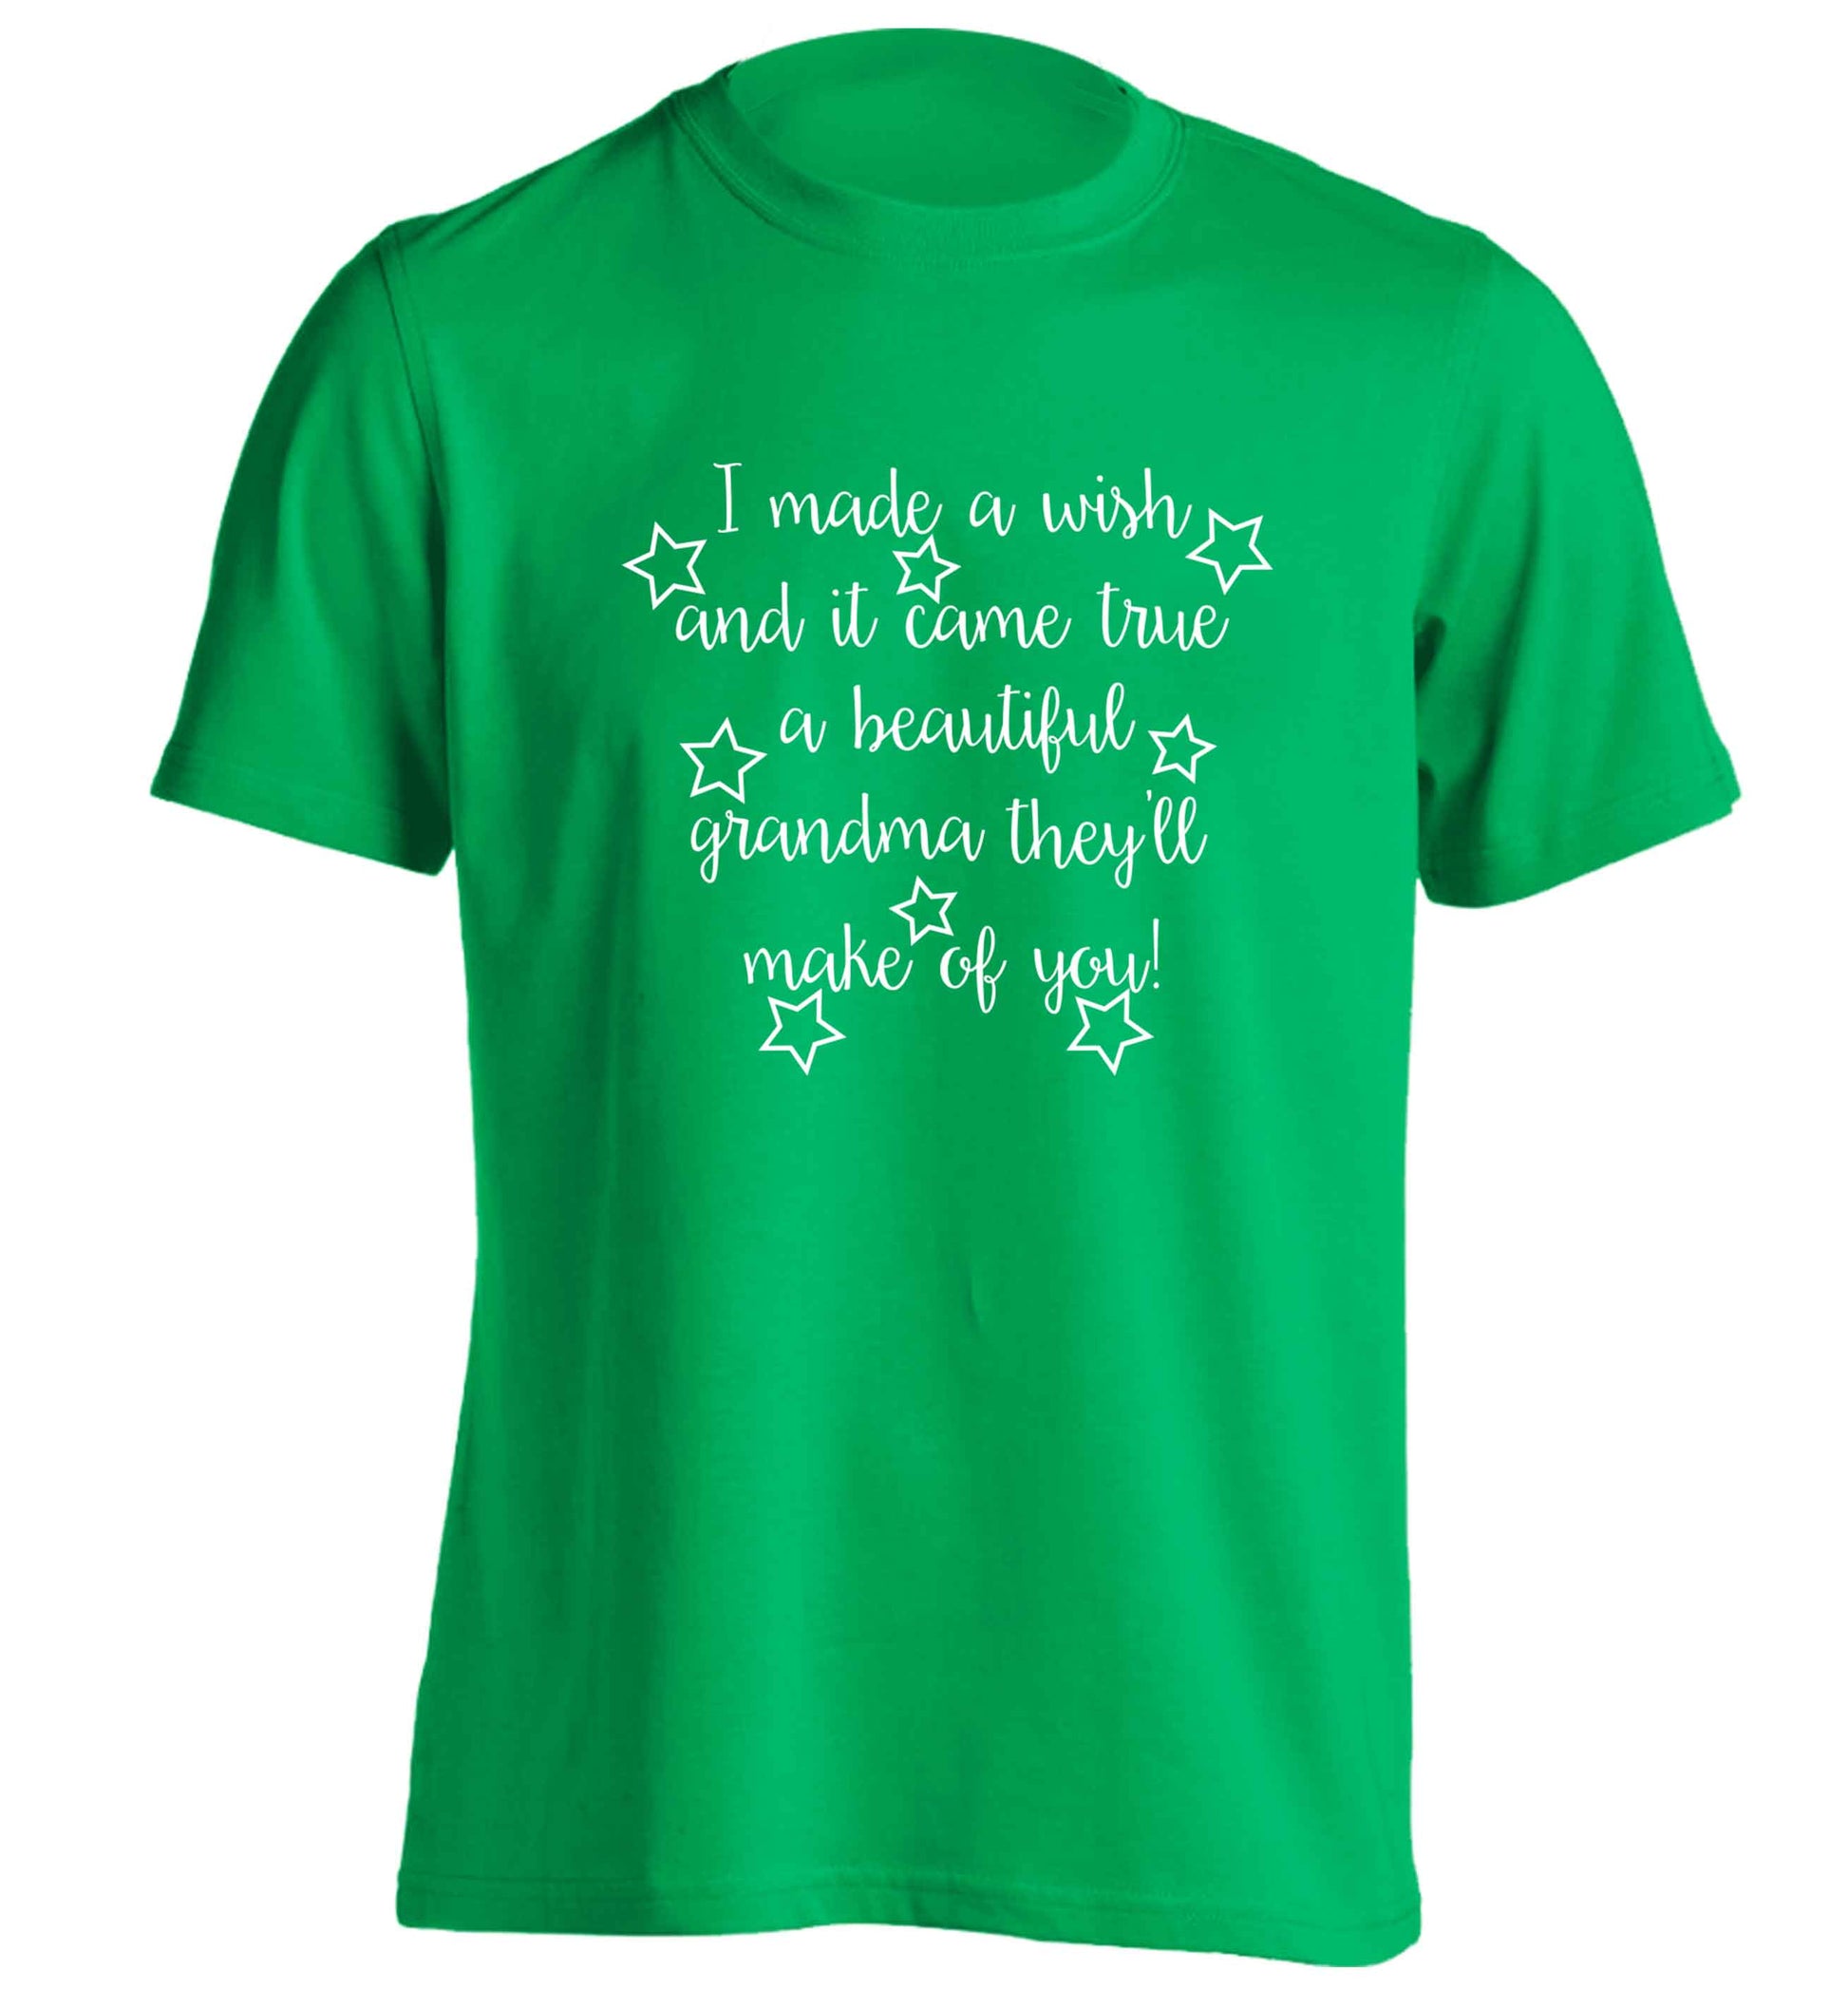 I made a wish and it came true a beautiful grandma they'll make of you! adults unisex green Tshirt 2XL